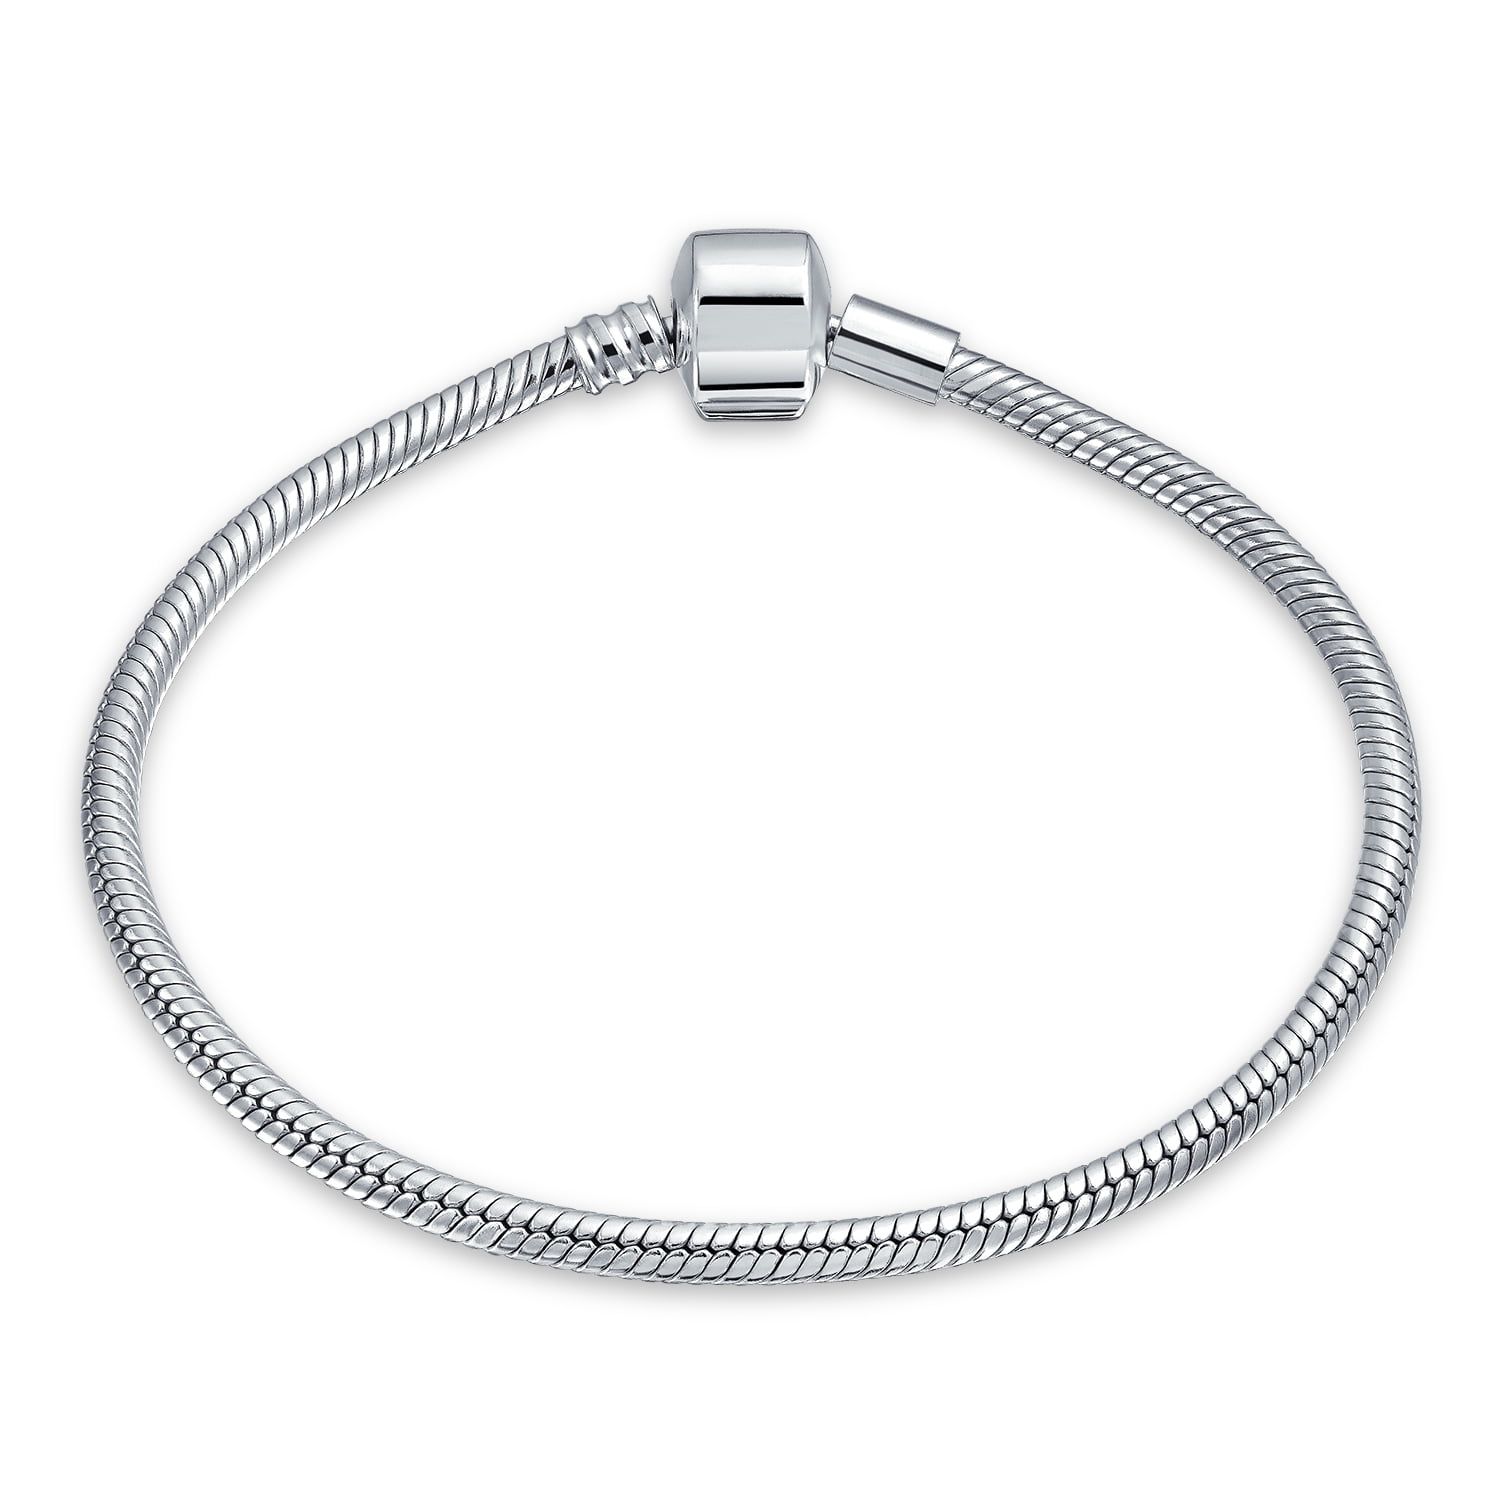 Solid Sterling Silver European snap clasp snake chain Charm Bracelet in 9 Sizes. 